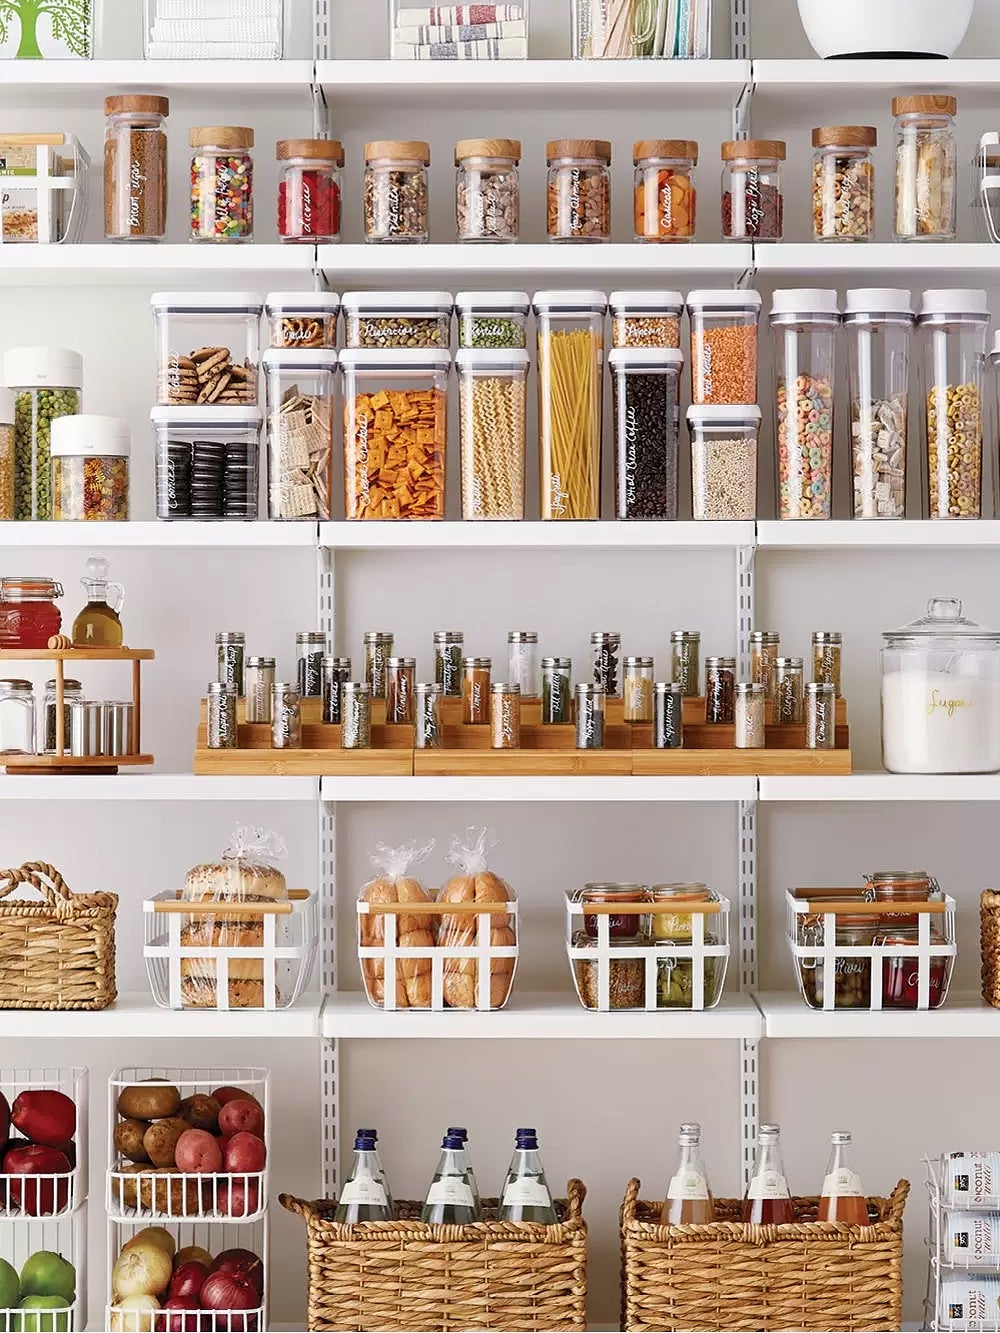 Organized pantry with baskets and bins